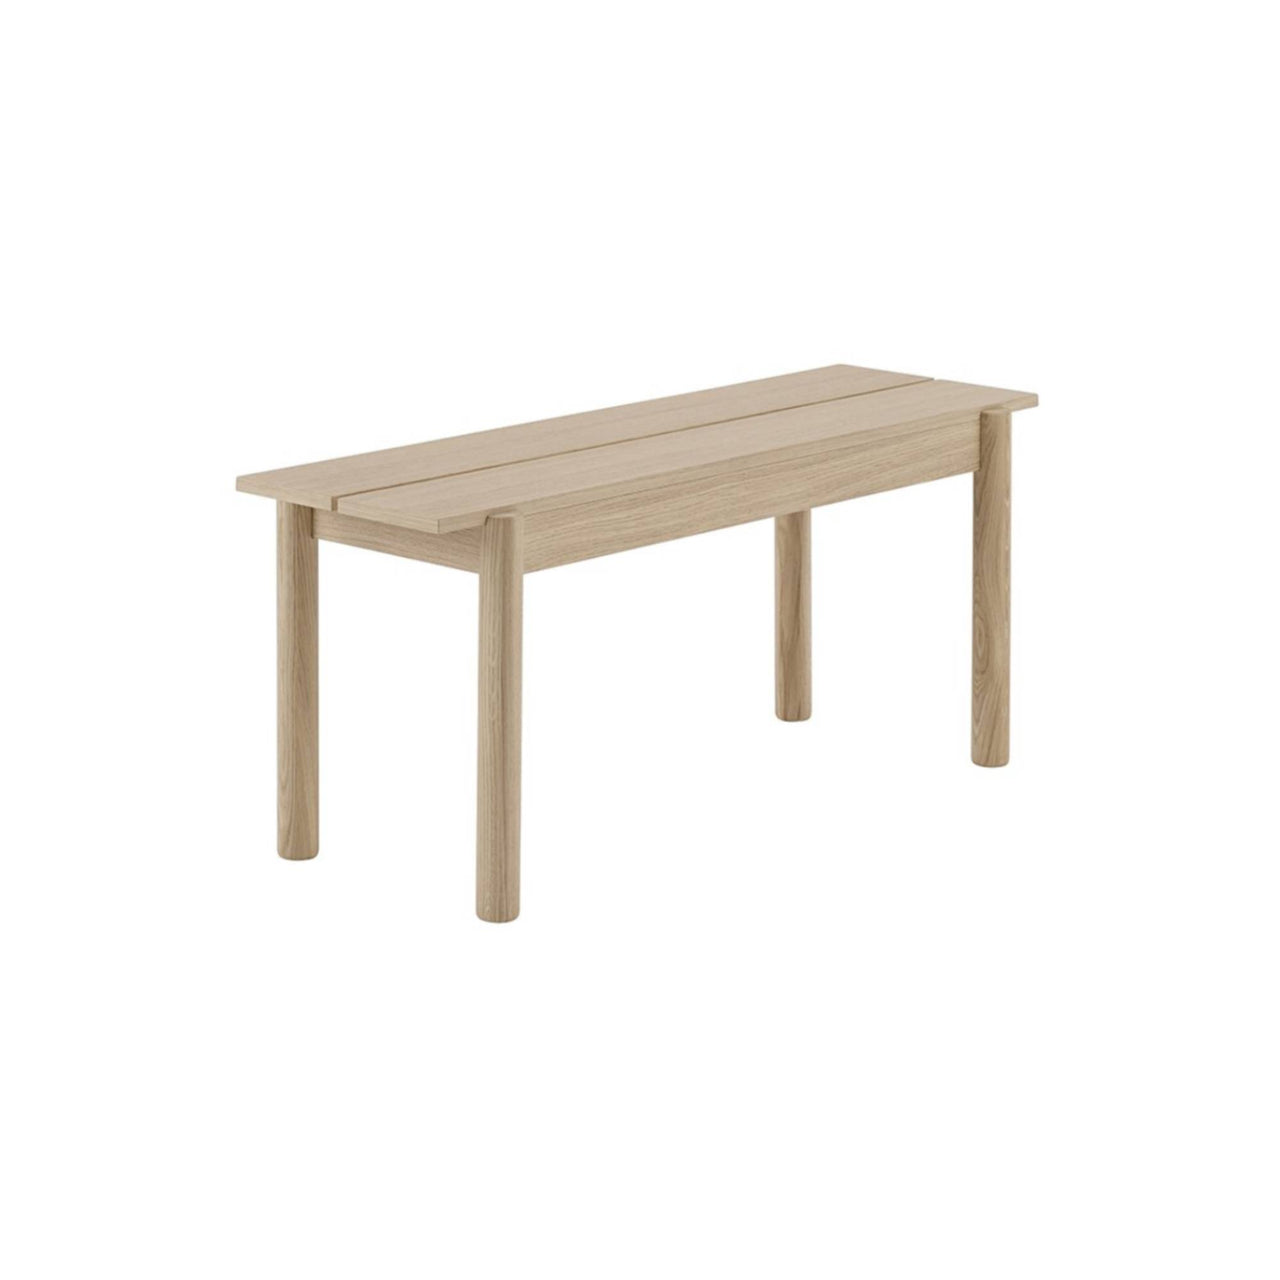 Linear Wood Bench: Small - 43.3